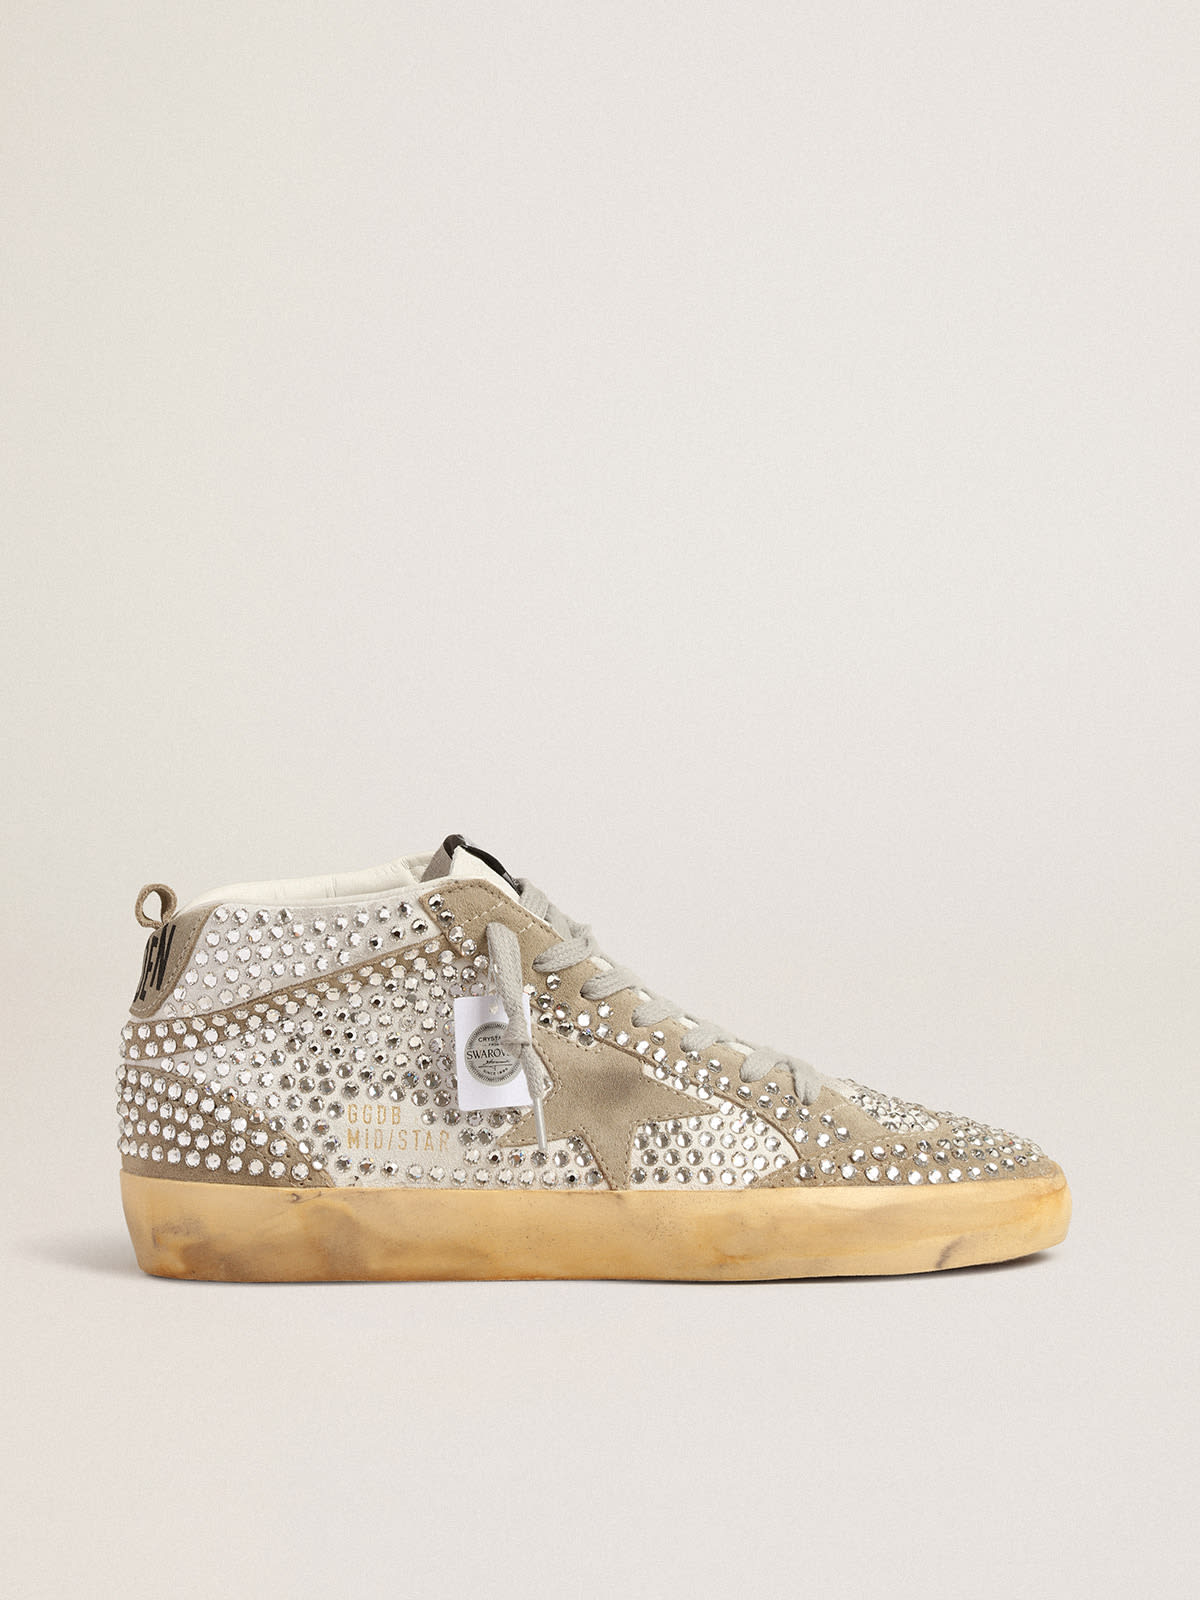 Golden Goose - Mid Star LTD in white and dove-gray suede with Swarovski crystals in 